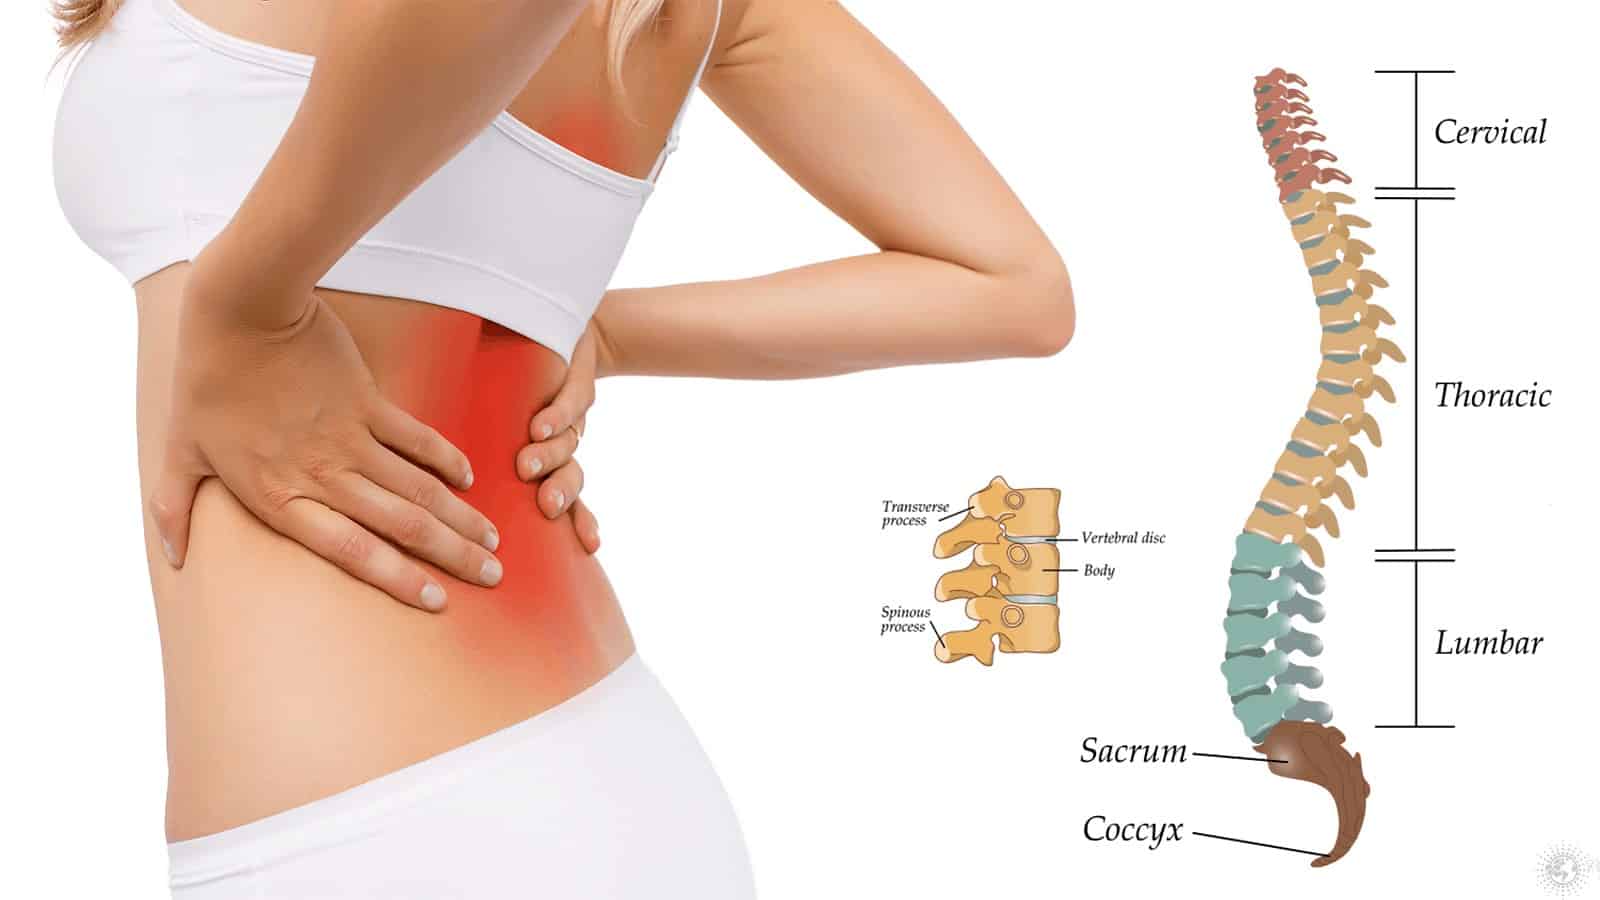 5 Causes for Back Pain That Most People Ignore